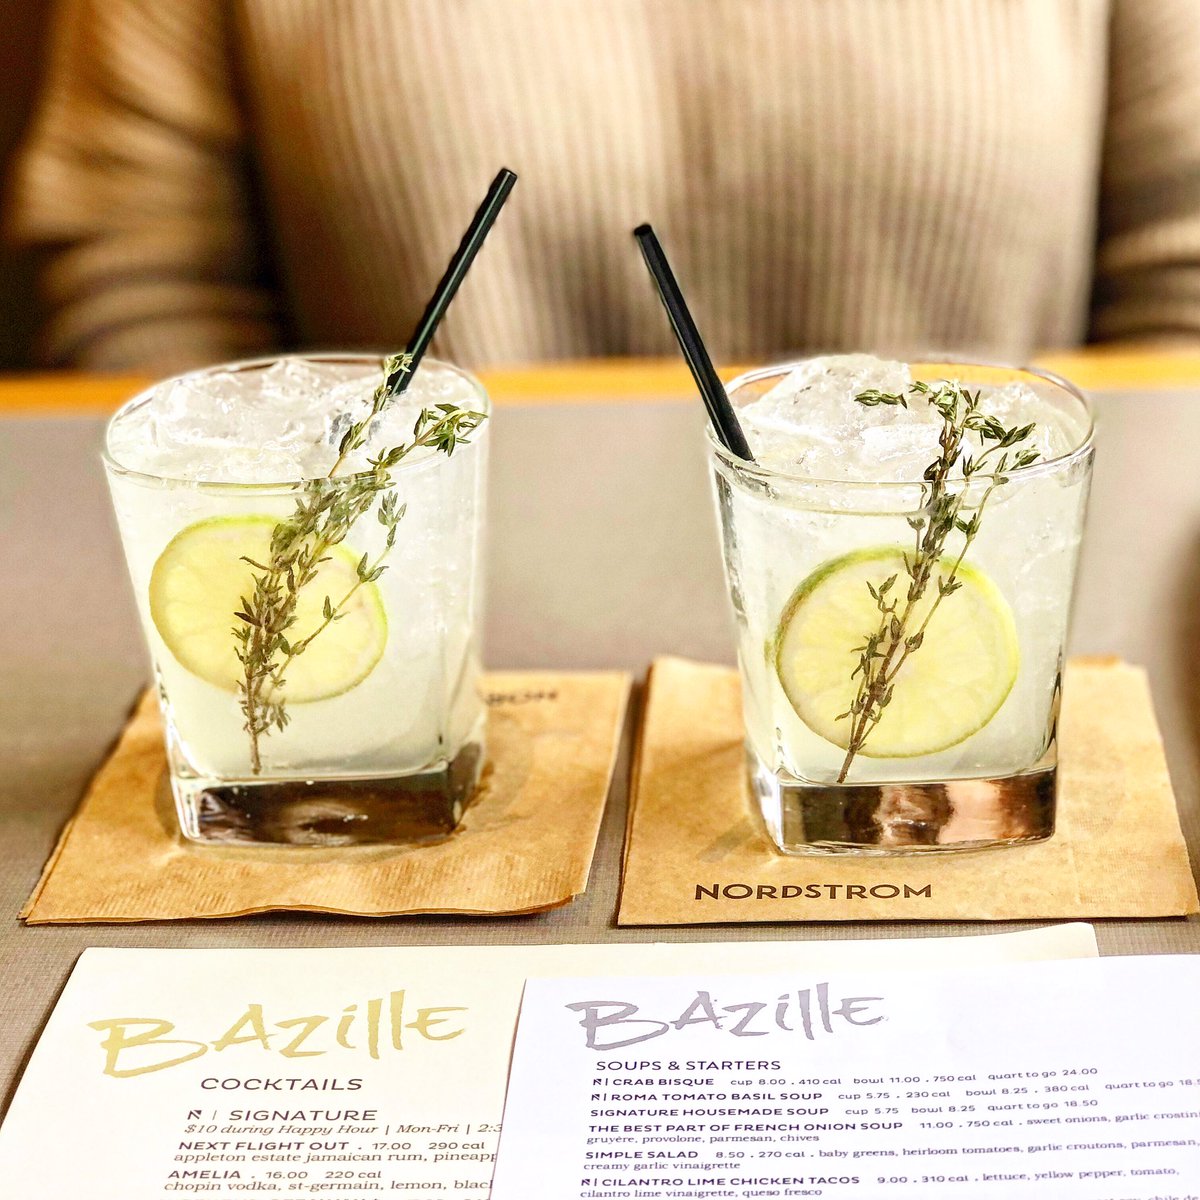 Afternoon Shopping Refreshments…
#travel #shopping #happyhour #cocktails #weekendvibes #travelblogger #datenight #gintonic #bazille #nordstrom #stonebriarmall #friscotx #northdallas #dallas #texas